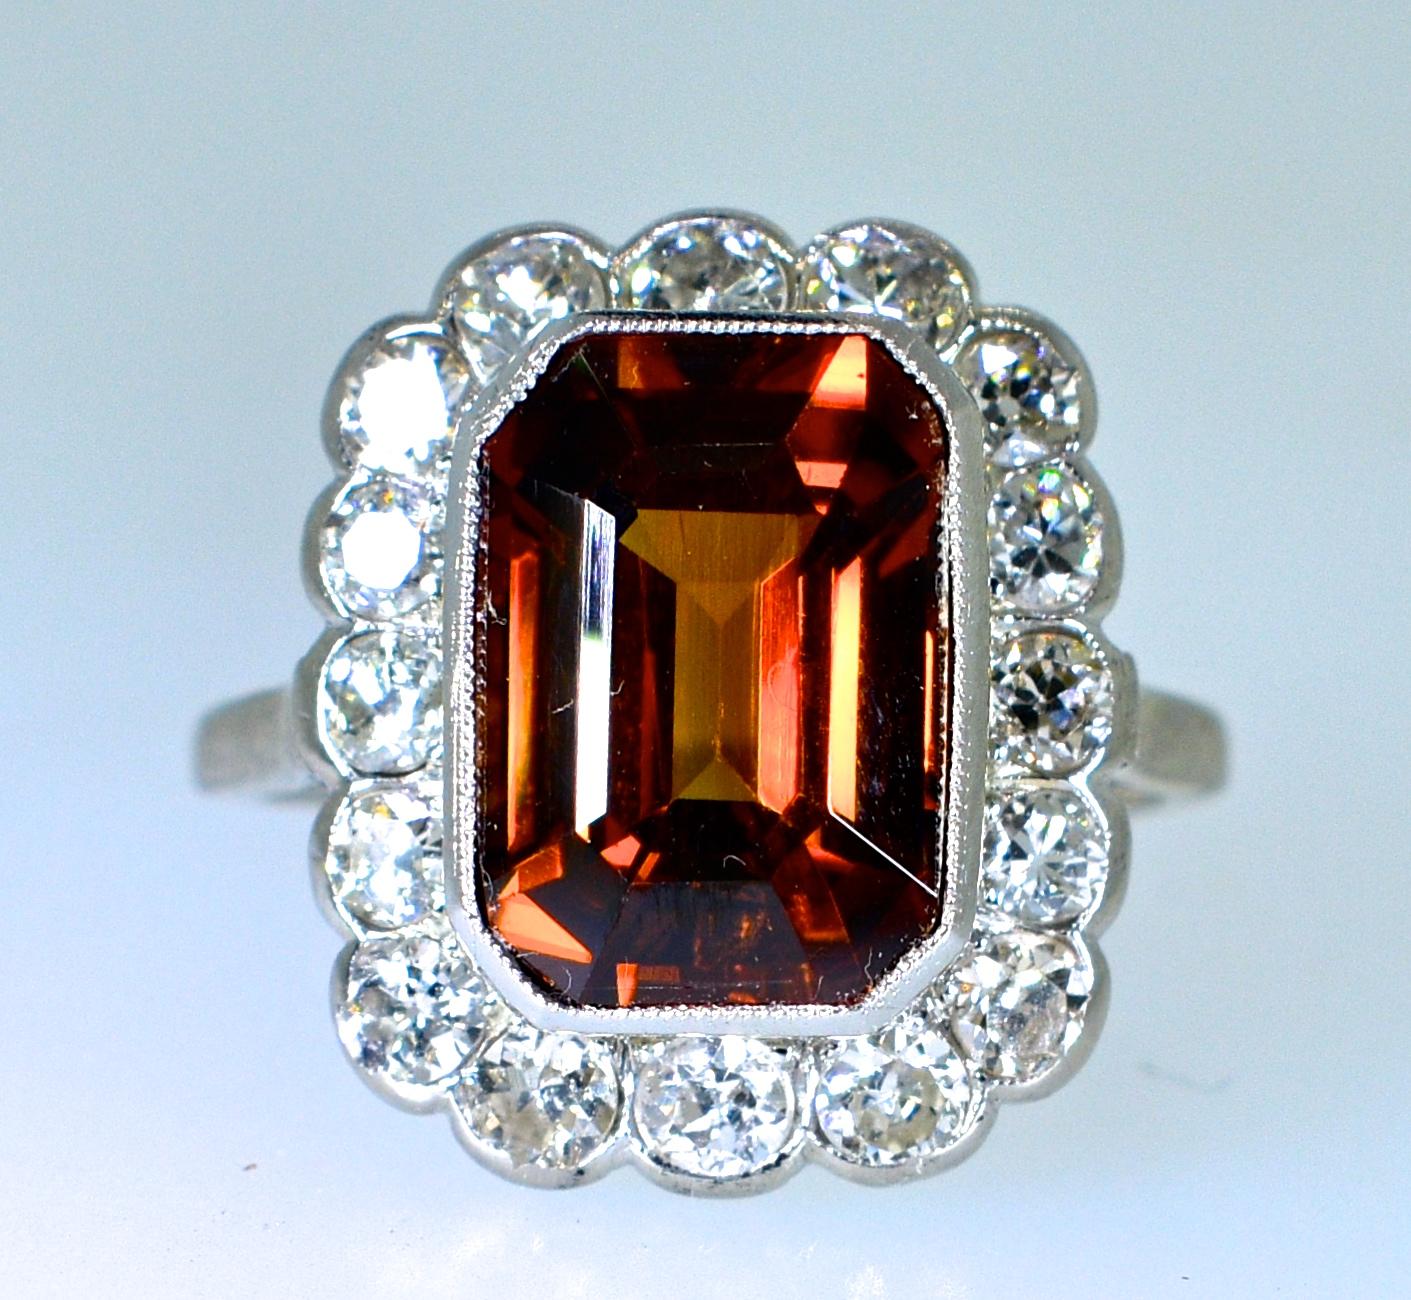 The center stone is a fine natural Zircon.  The tawny color is very unusual.  It's chestnut like color has flashes of red which one rarely sees.  This stone weighs approximately 10 cts. and is surrounded by fine white old cut diamonds.  The diamonds